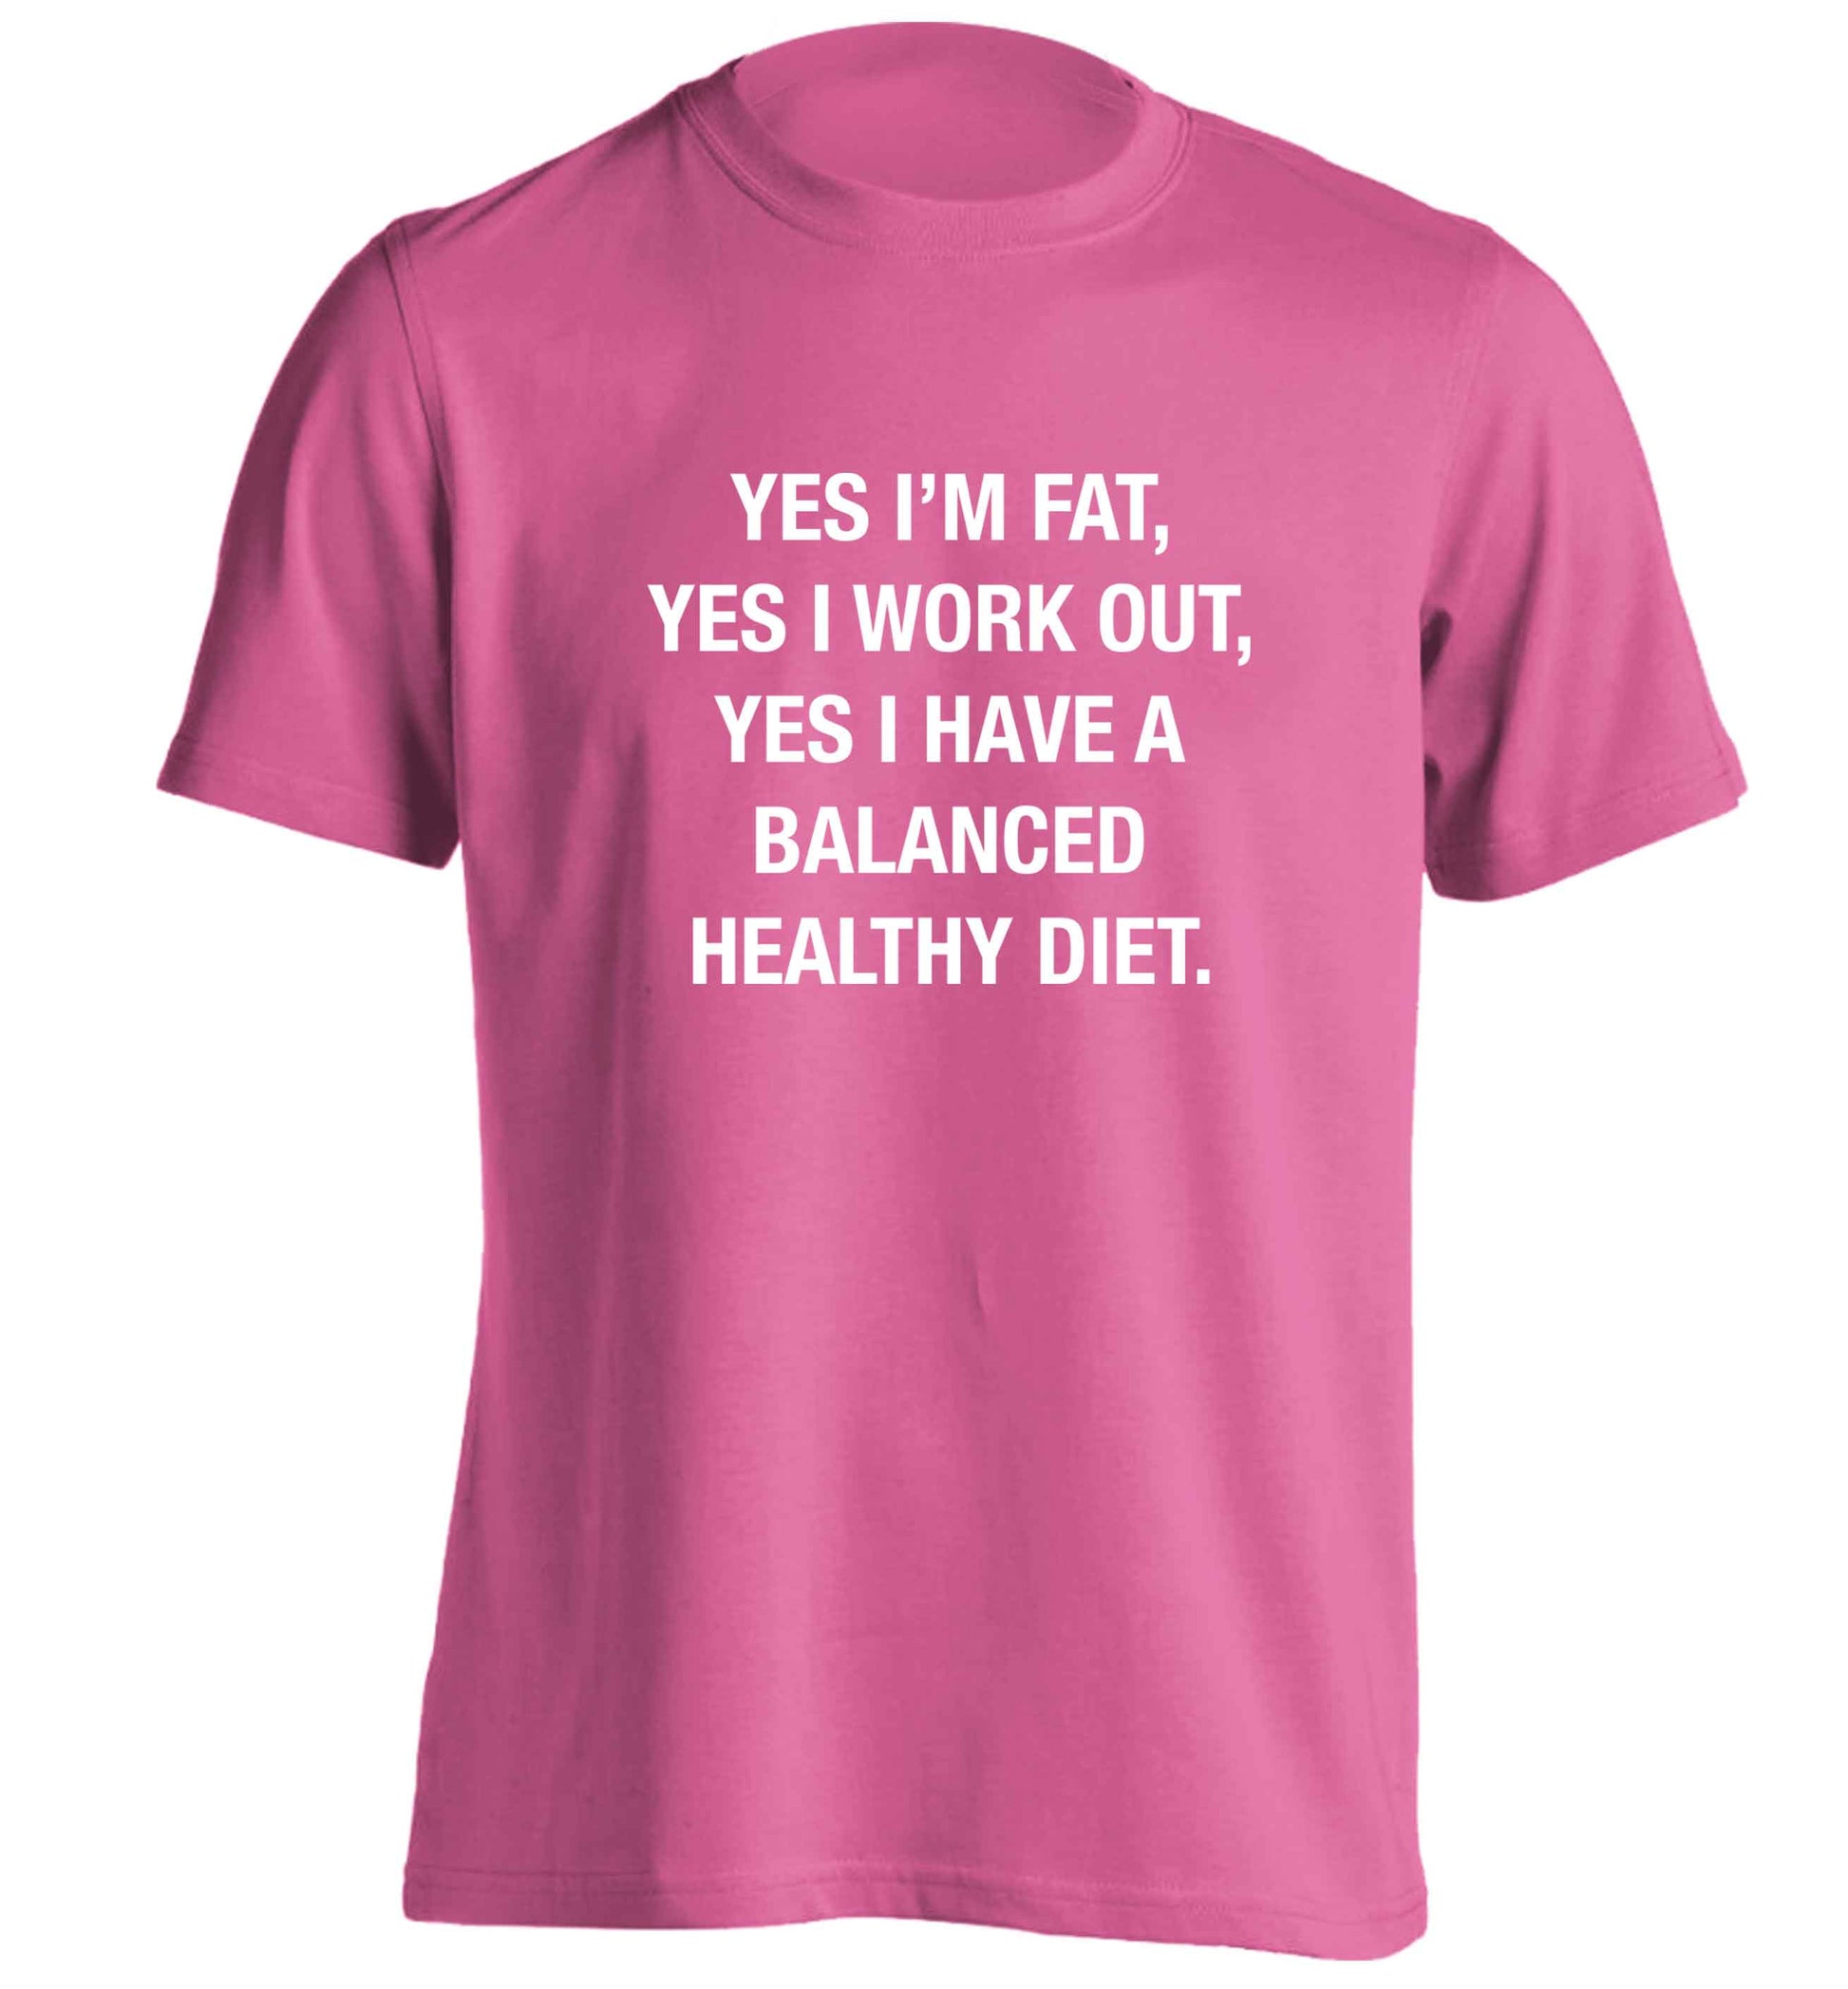 Yes I'm fat, yes I work out, yes I have a balanced healthy diet adults unisex pink Tshirt 2XL